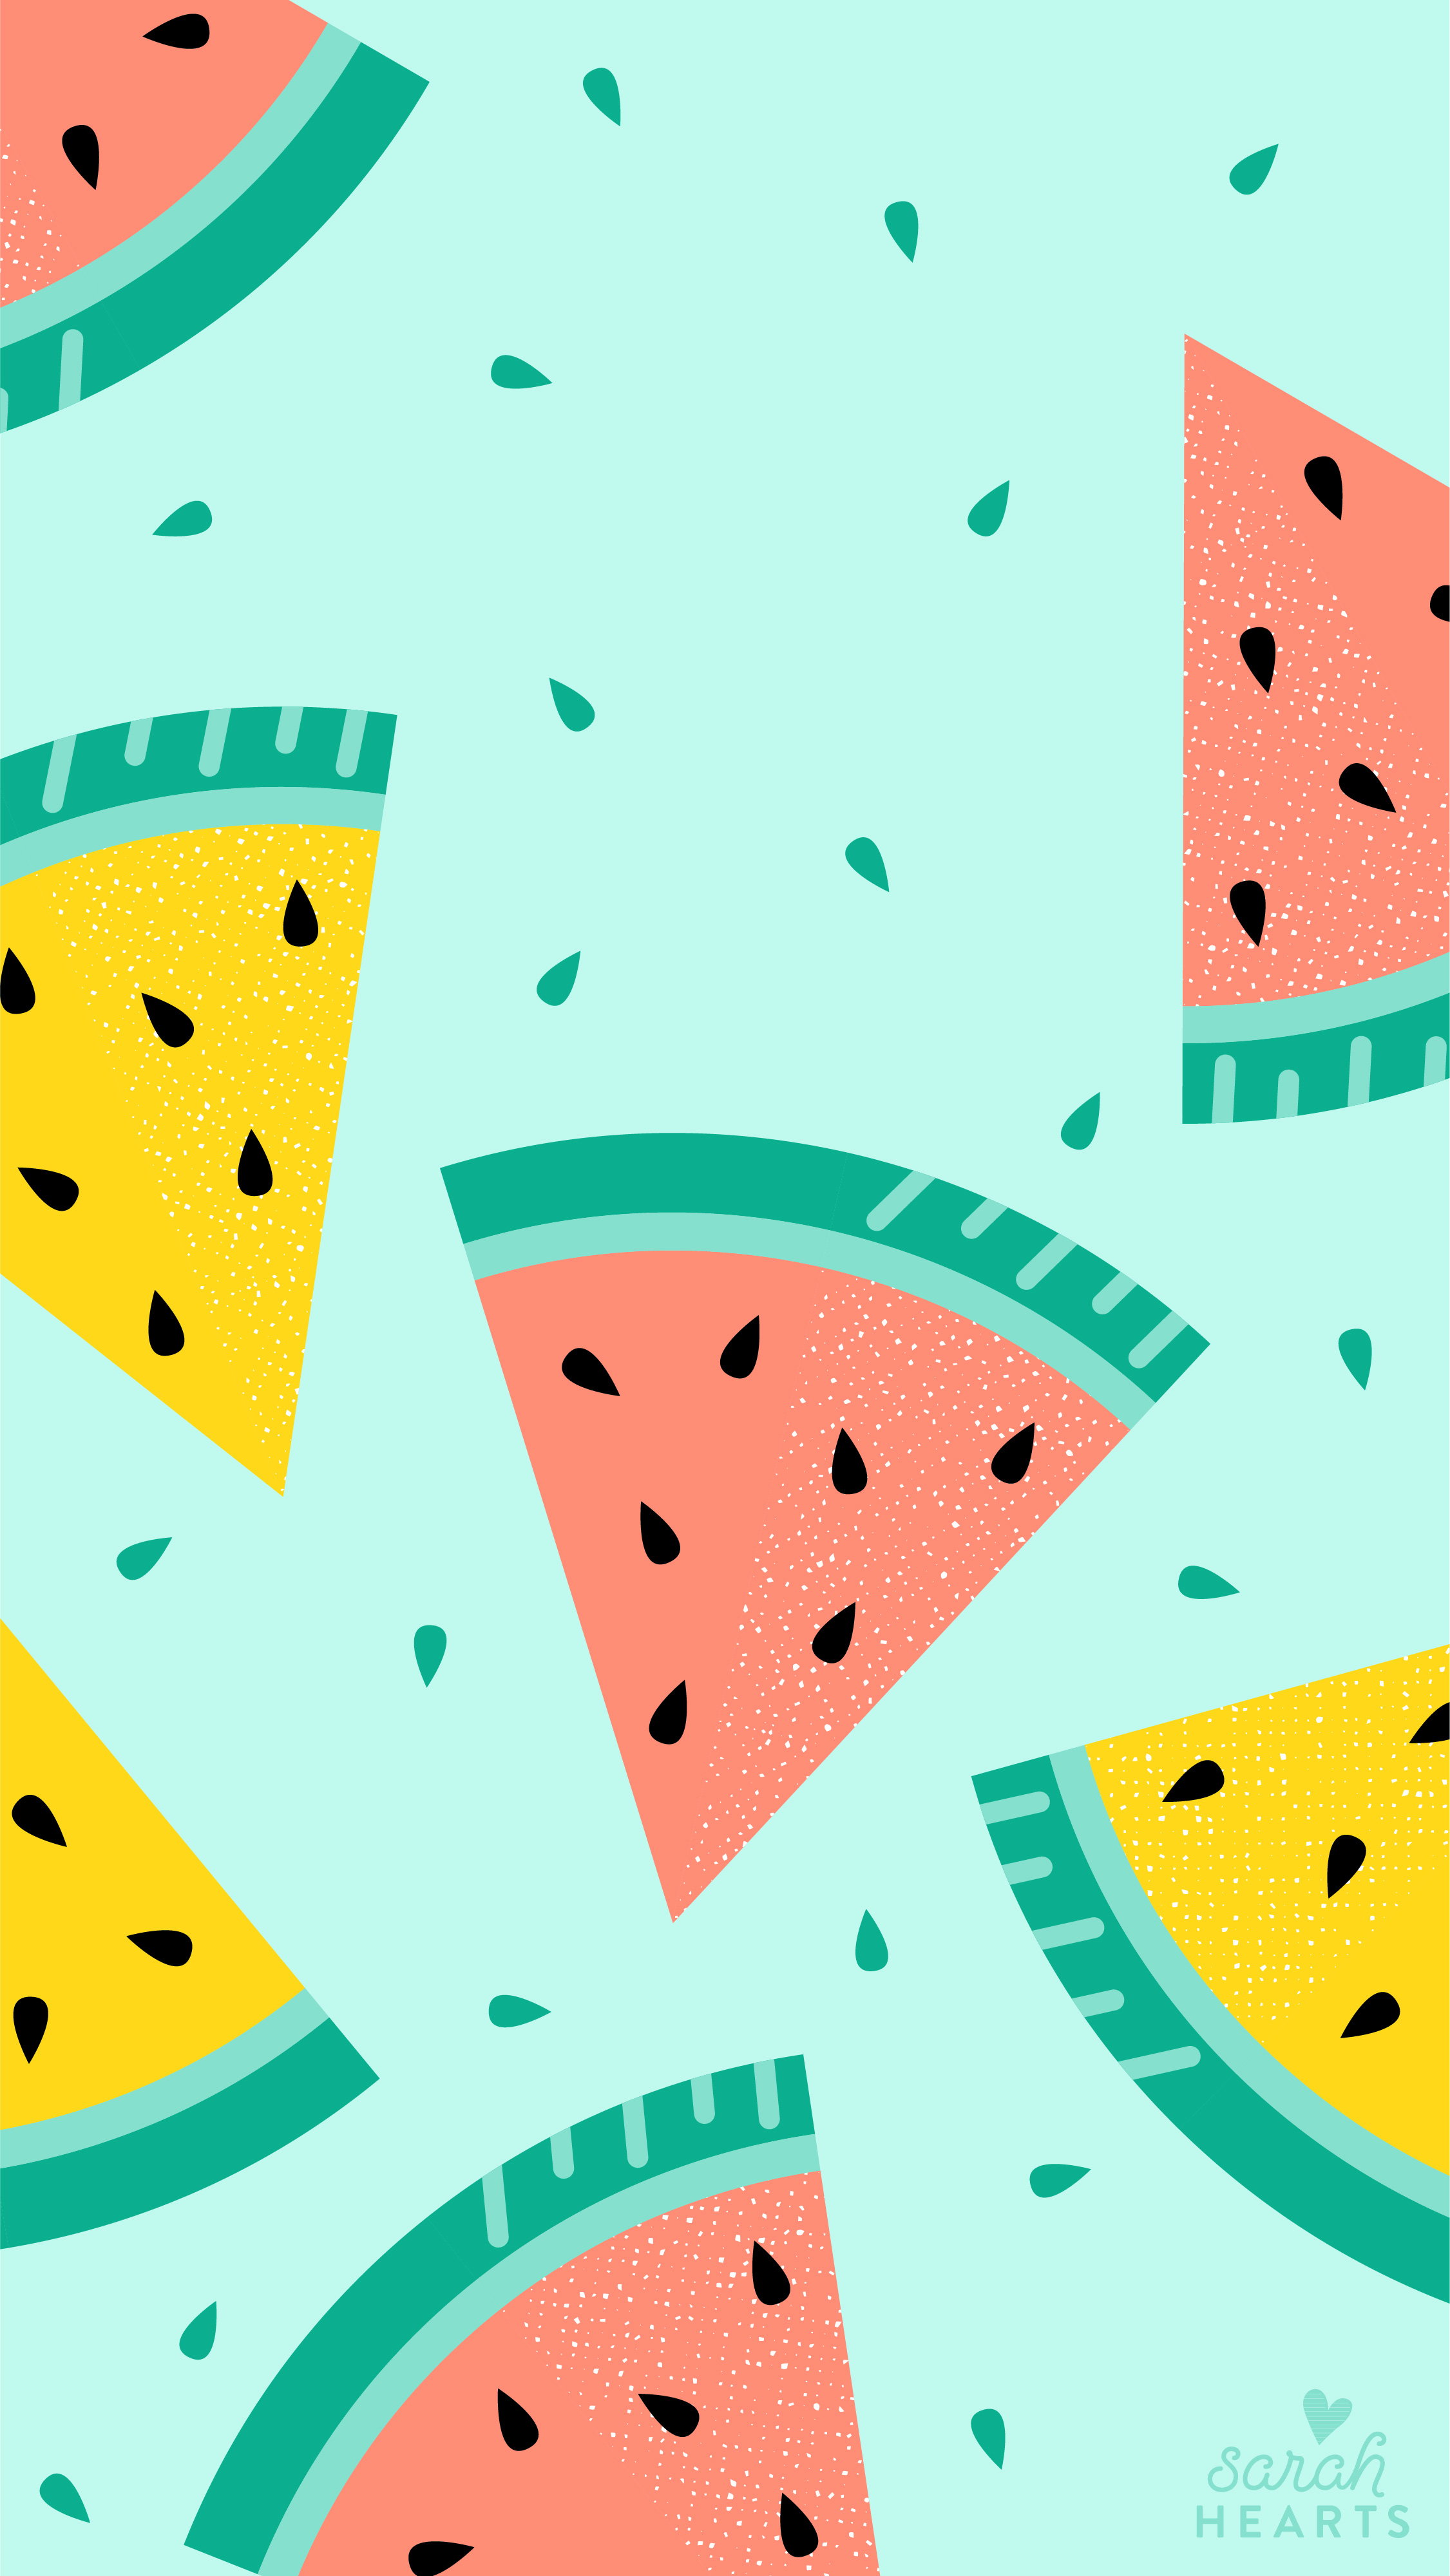 Watermelon Iphone Wallpapers